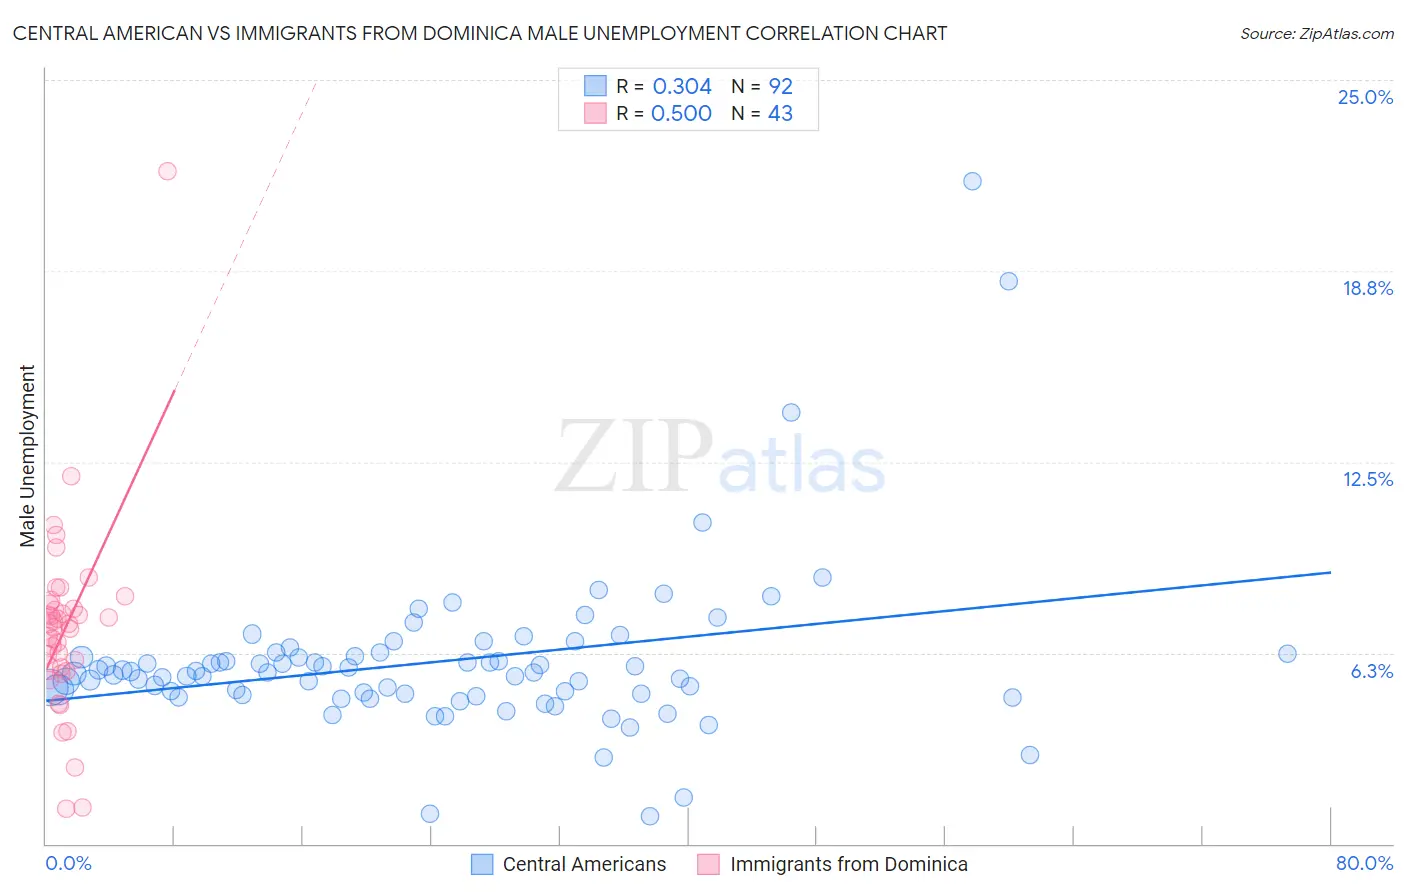 Central American vs Immigrants from Dominica Male Unemployment